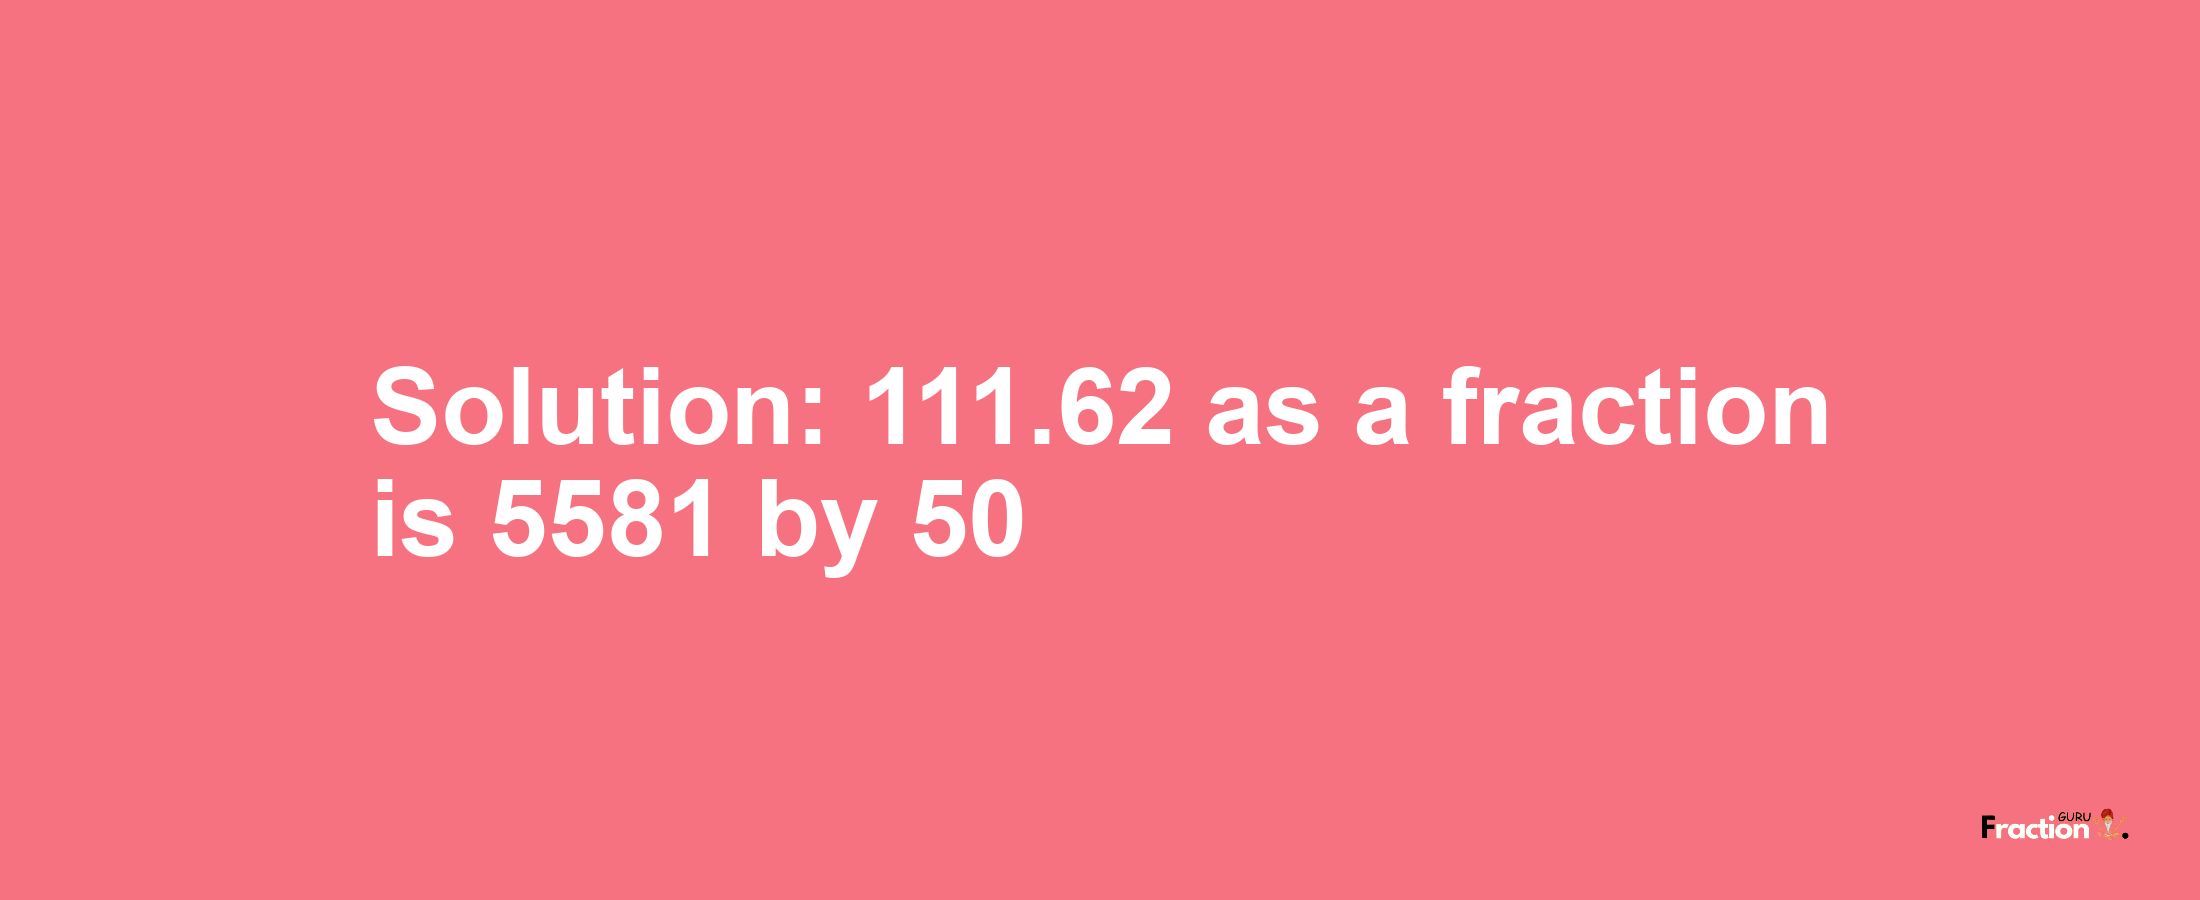 Solution:111.62 as a fraction is 5581/50